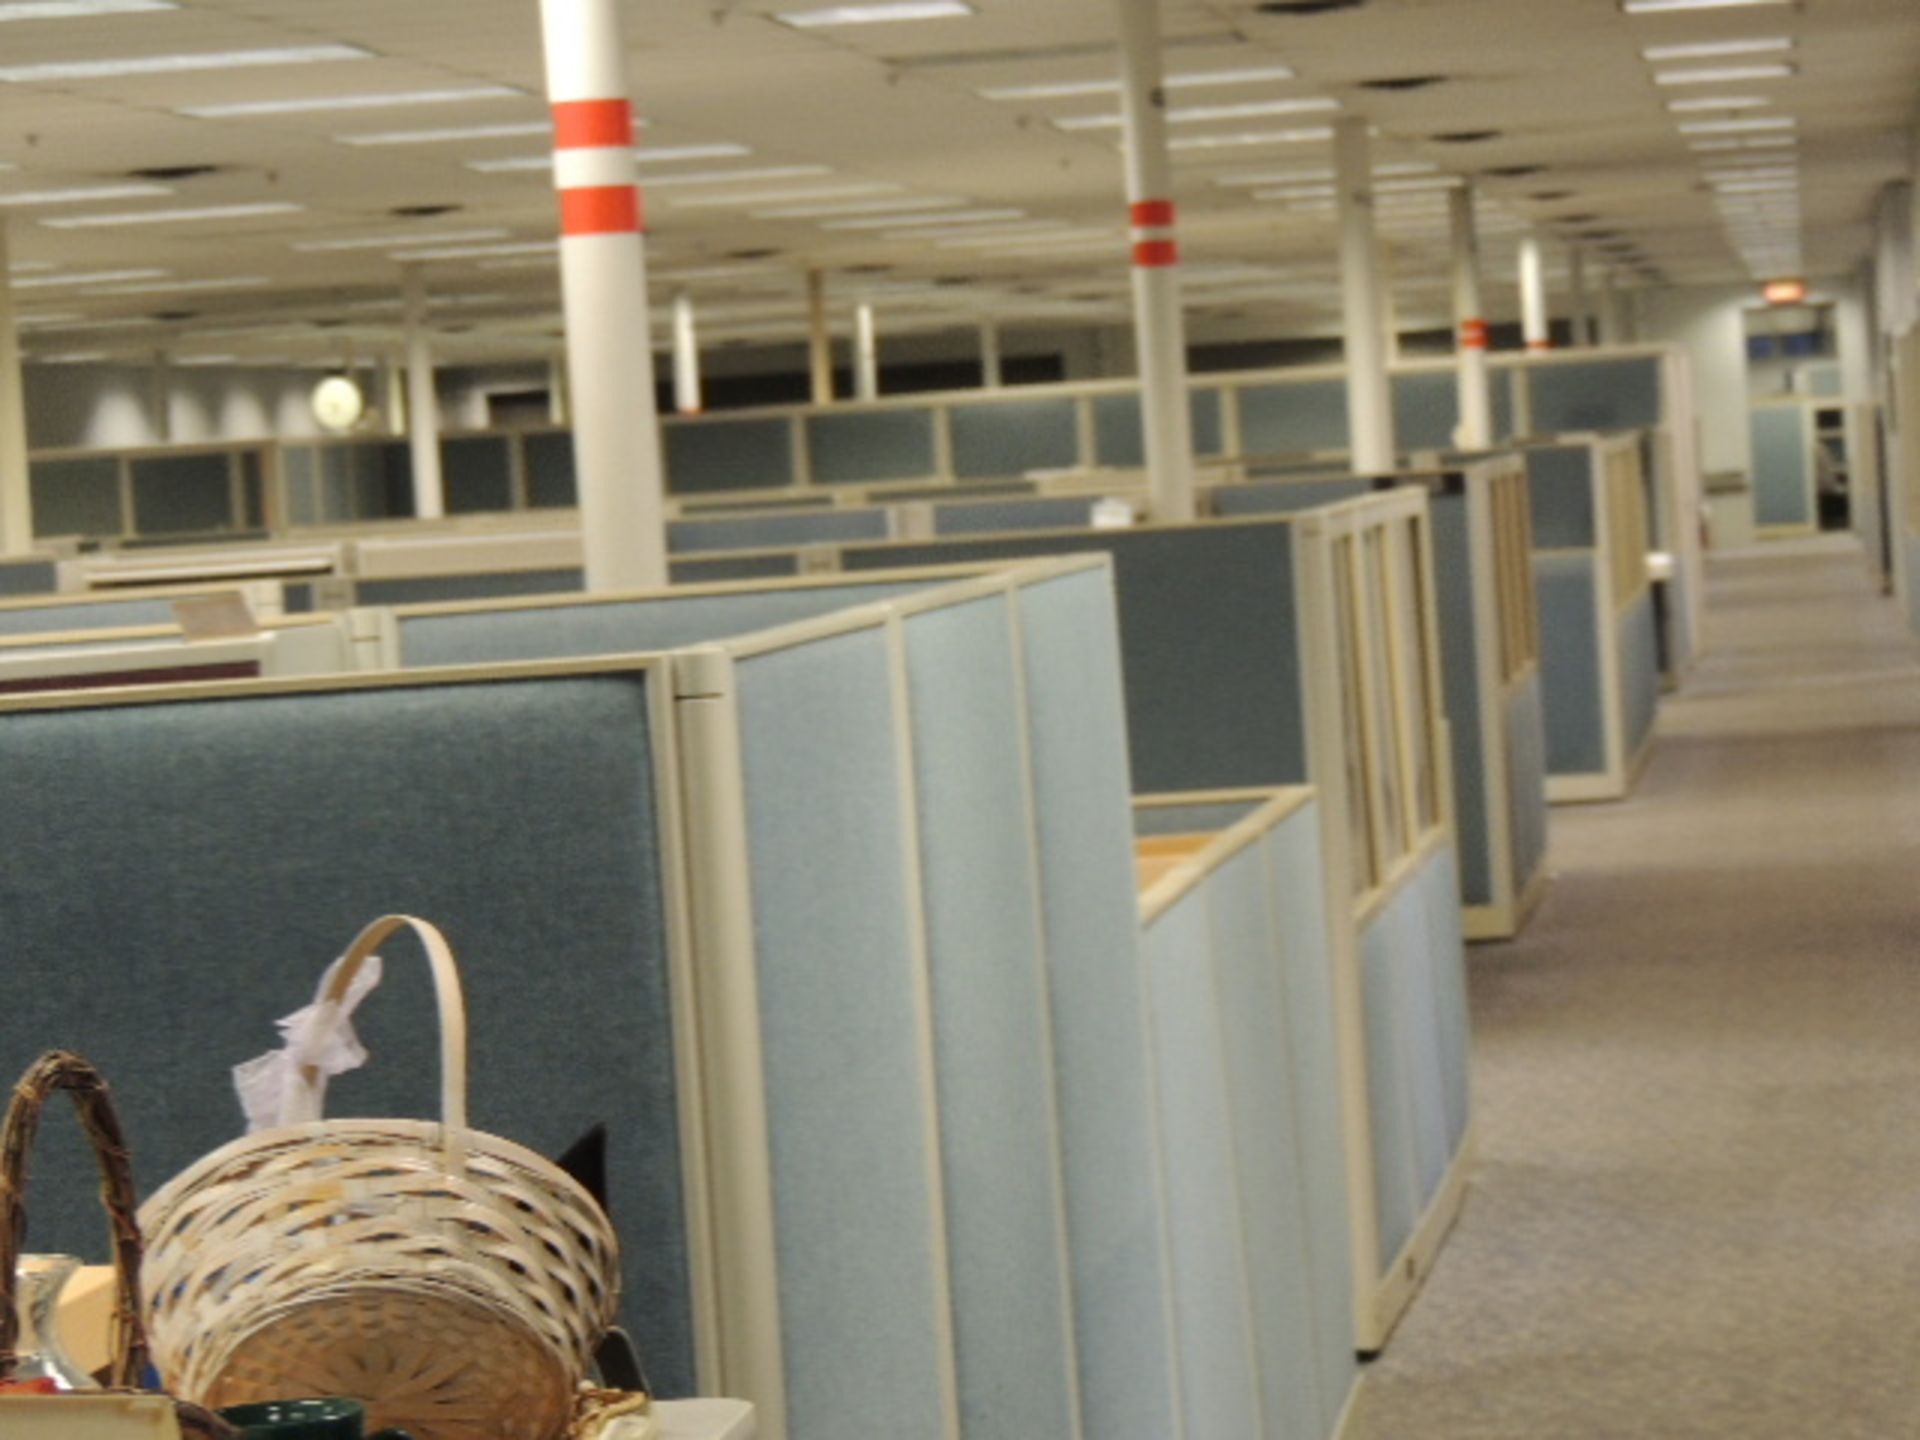 Office Cubicles & Contents. Lot: (8) offices w/ wooden and metal desks, file cabinets and lateral - Image 30 of 47